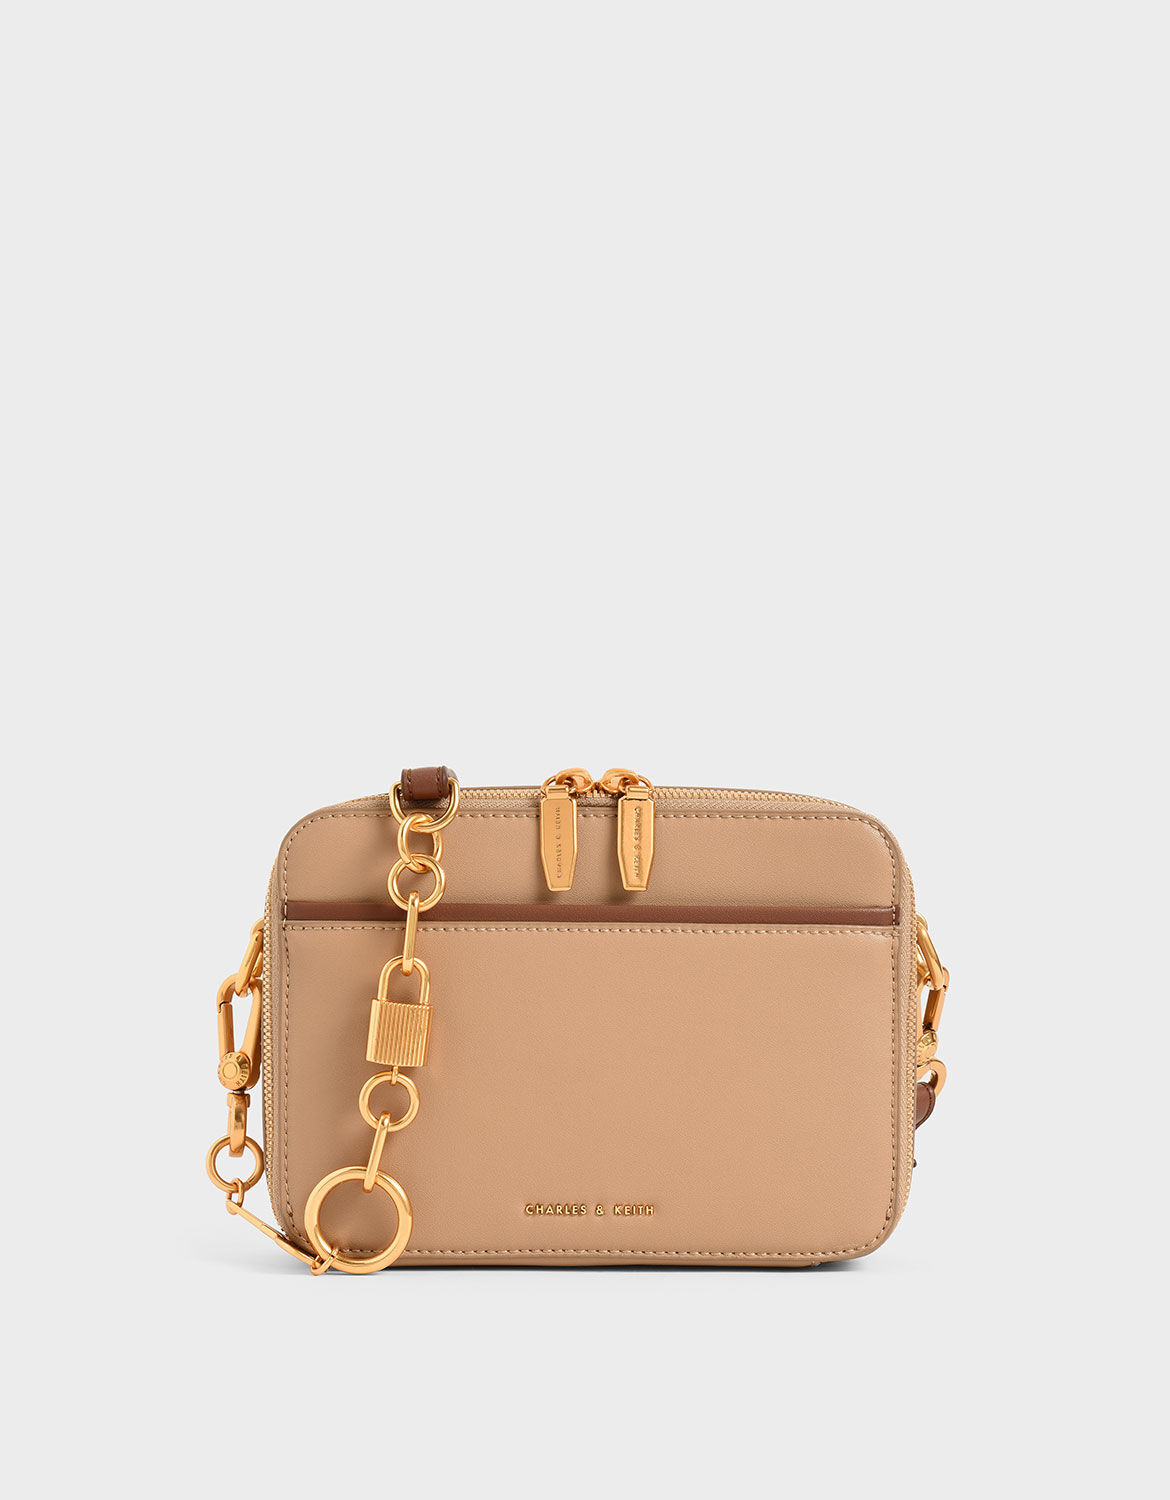 charles and keith crossbody